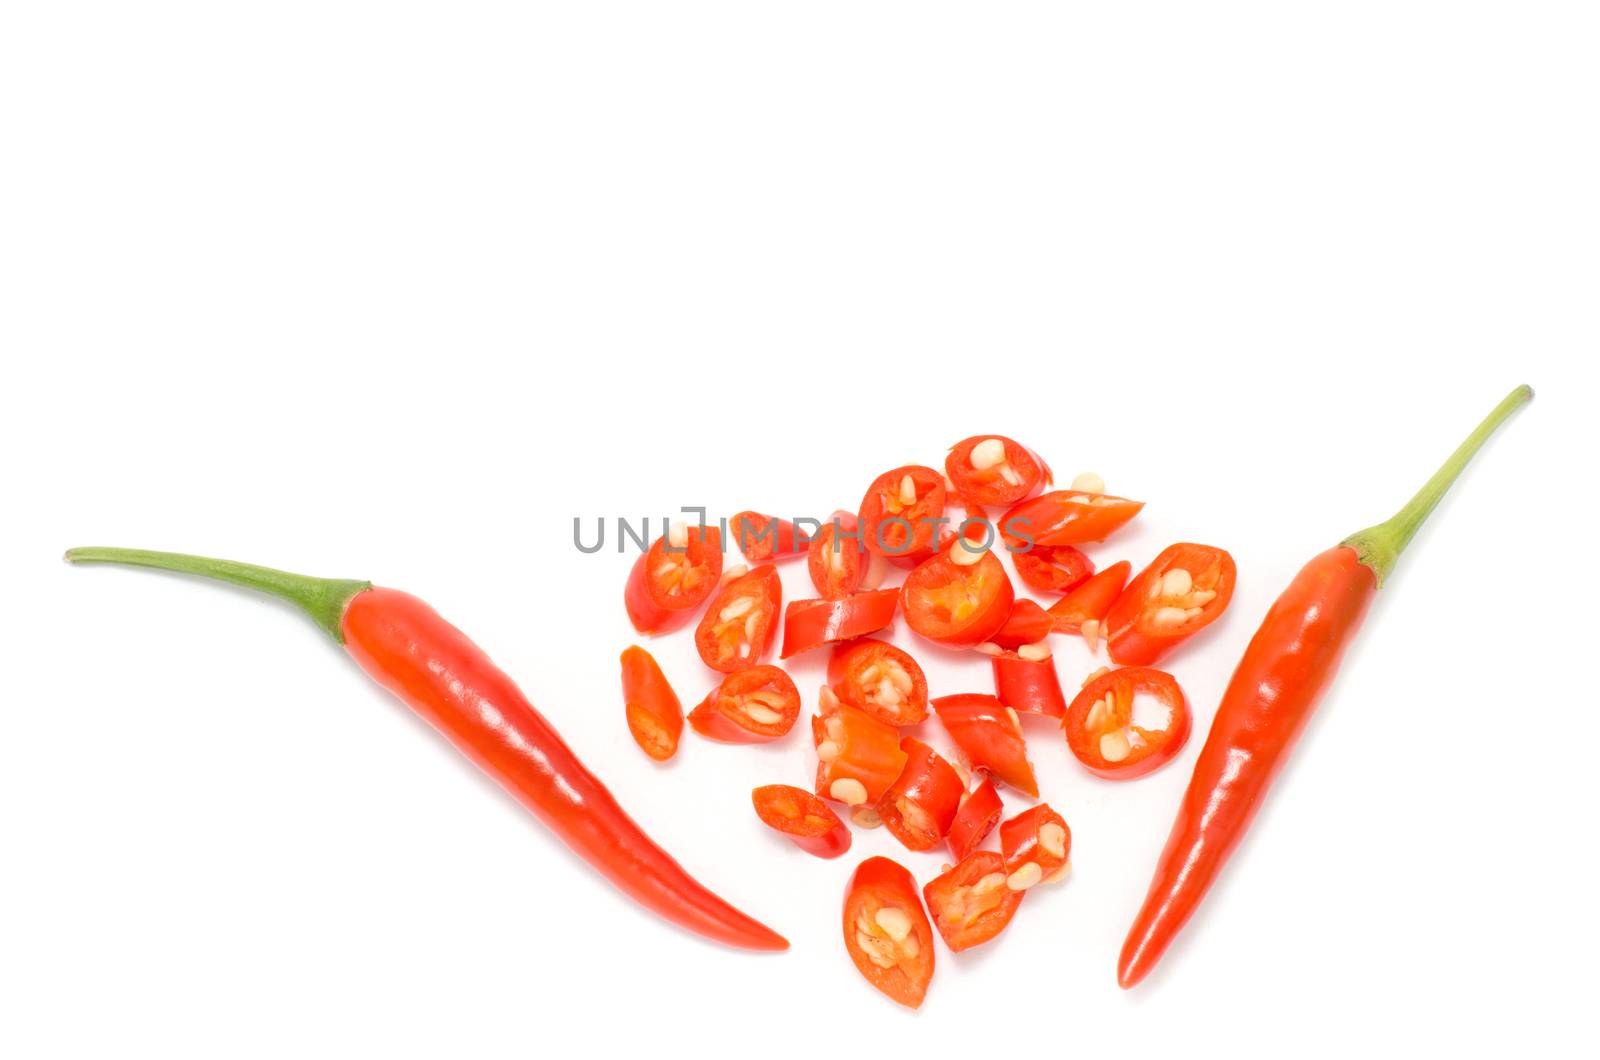 Two red chili peppers with small slices on white background